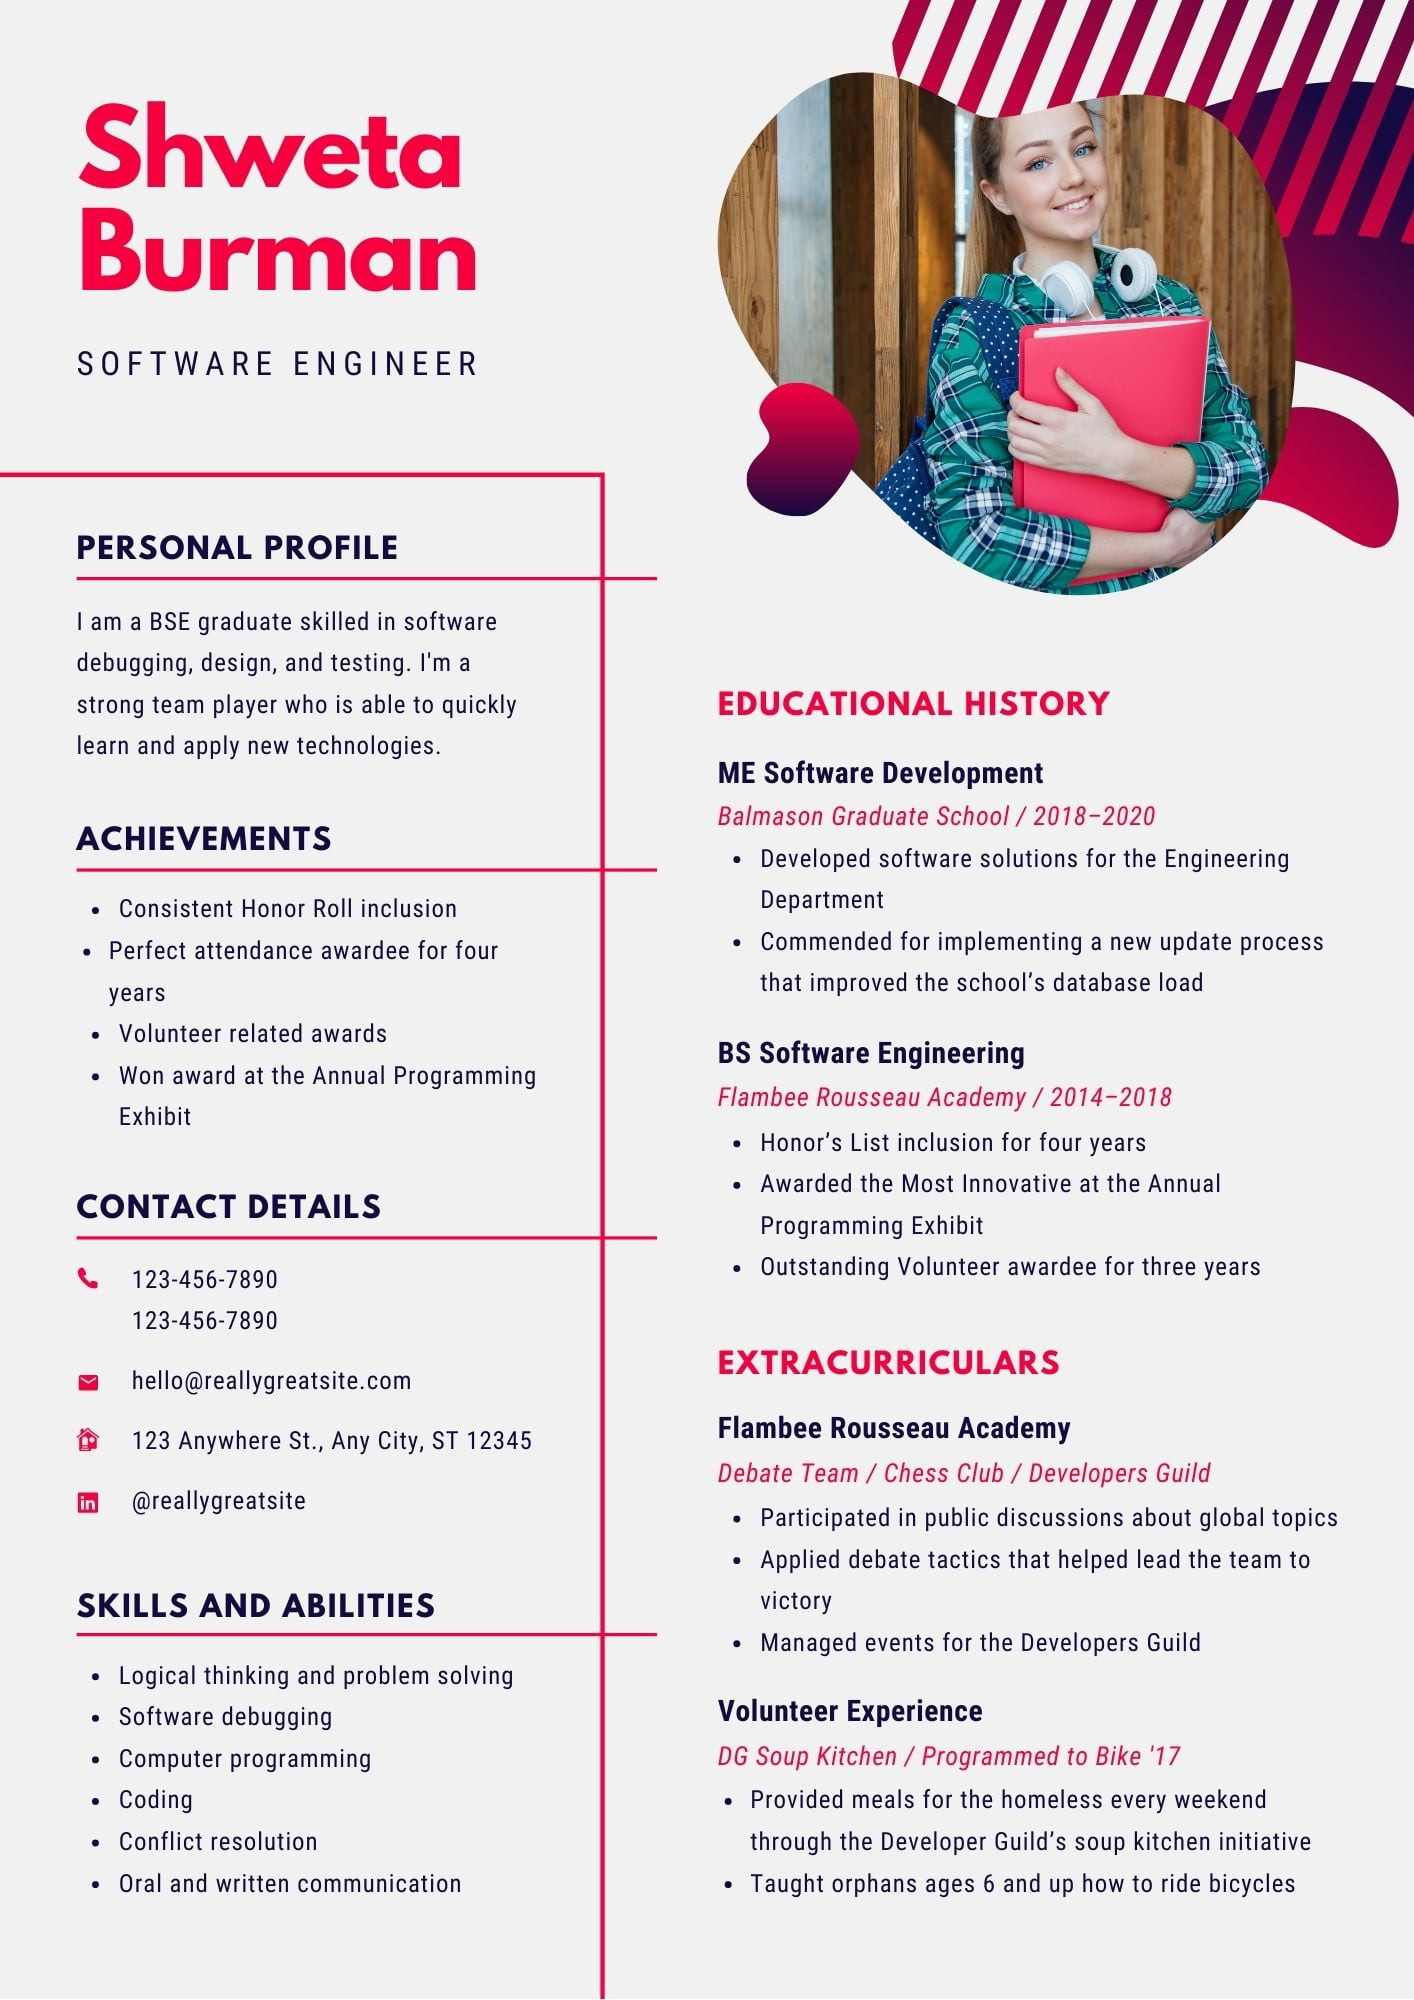 Resume Samples for Freshers Engineers India software Developer Resume Samples Fresher & Experienced Word, Pdf